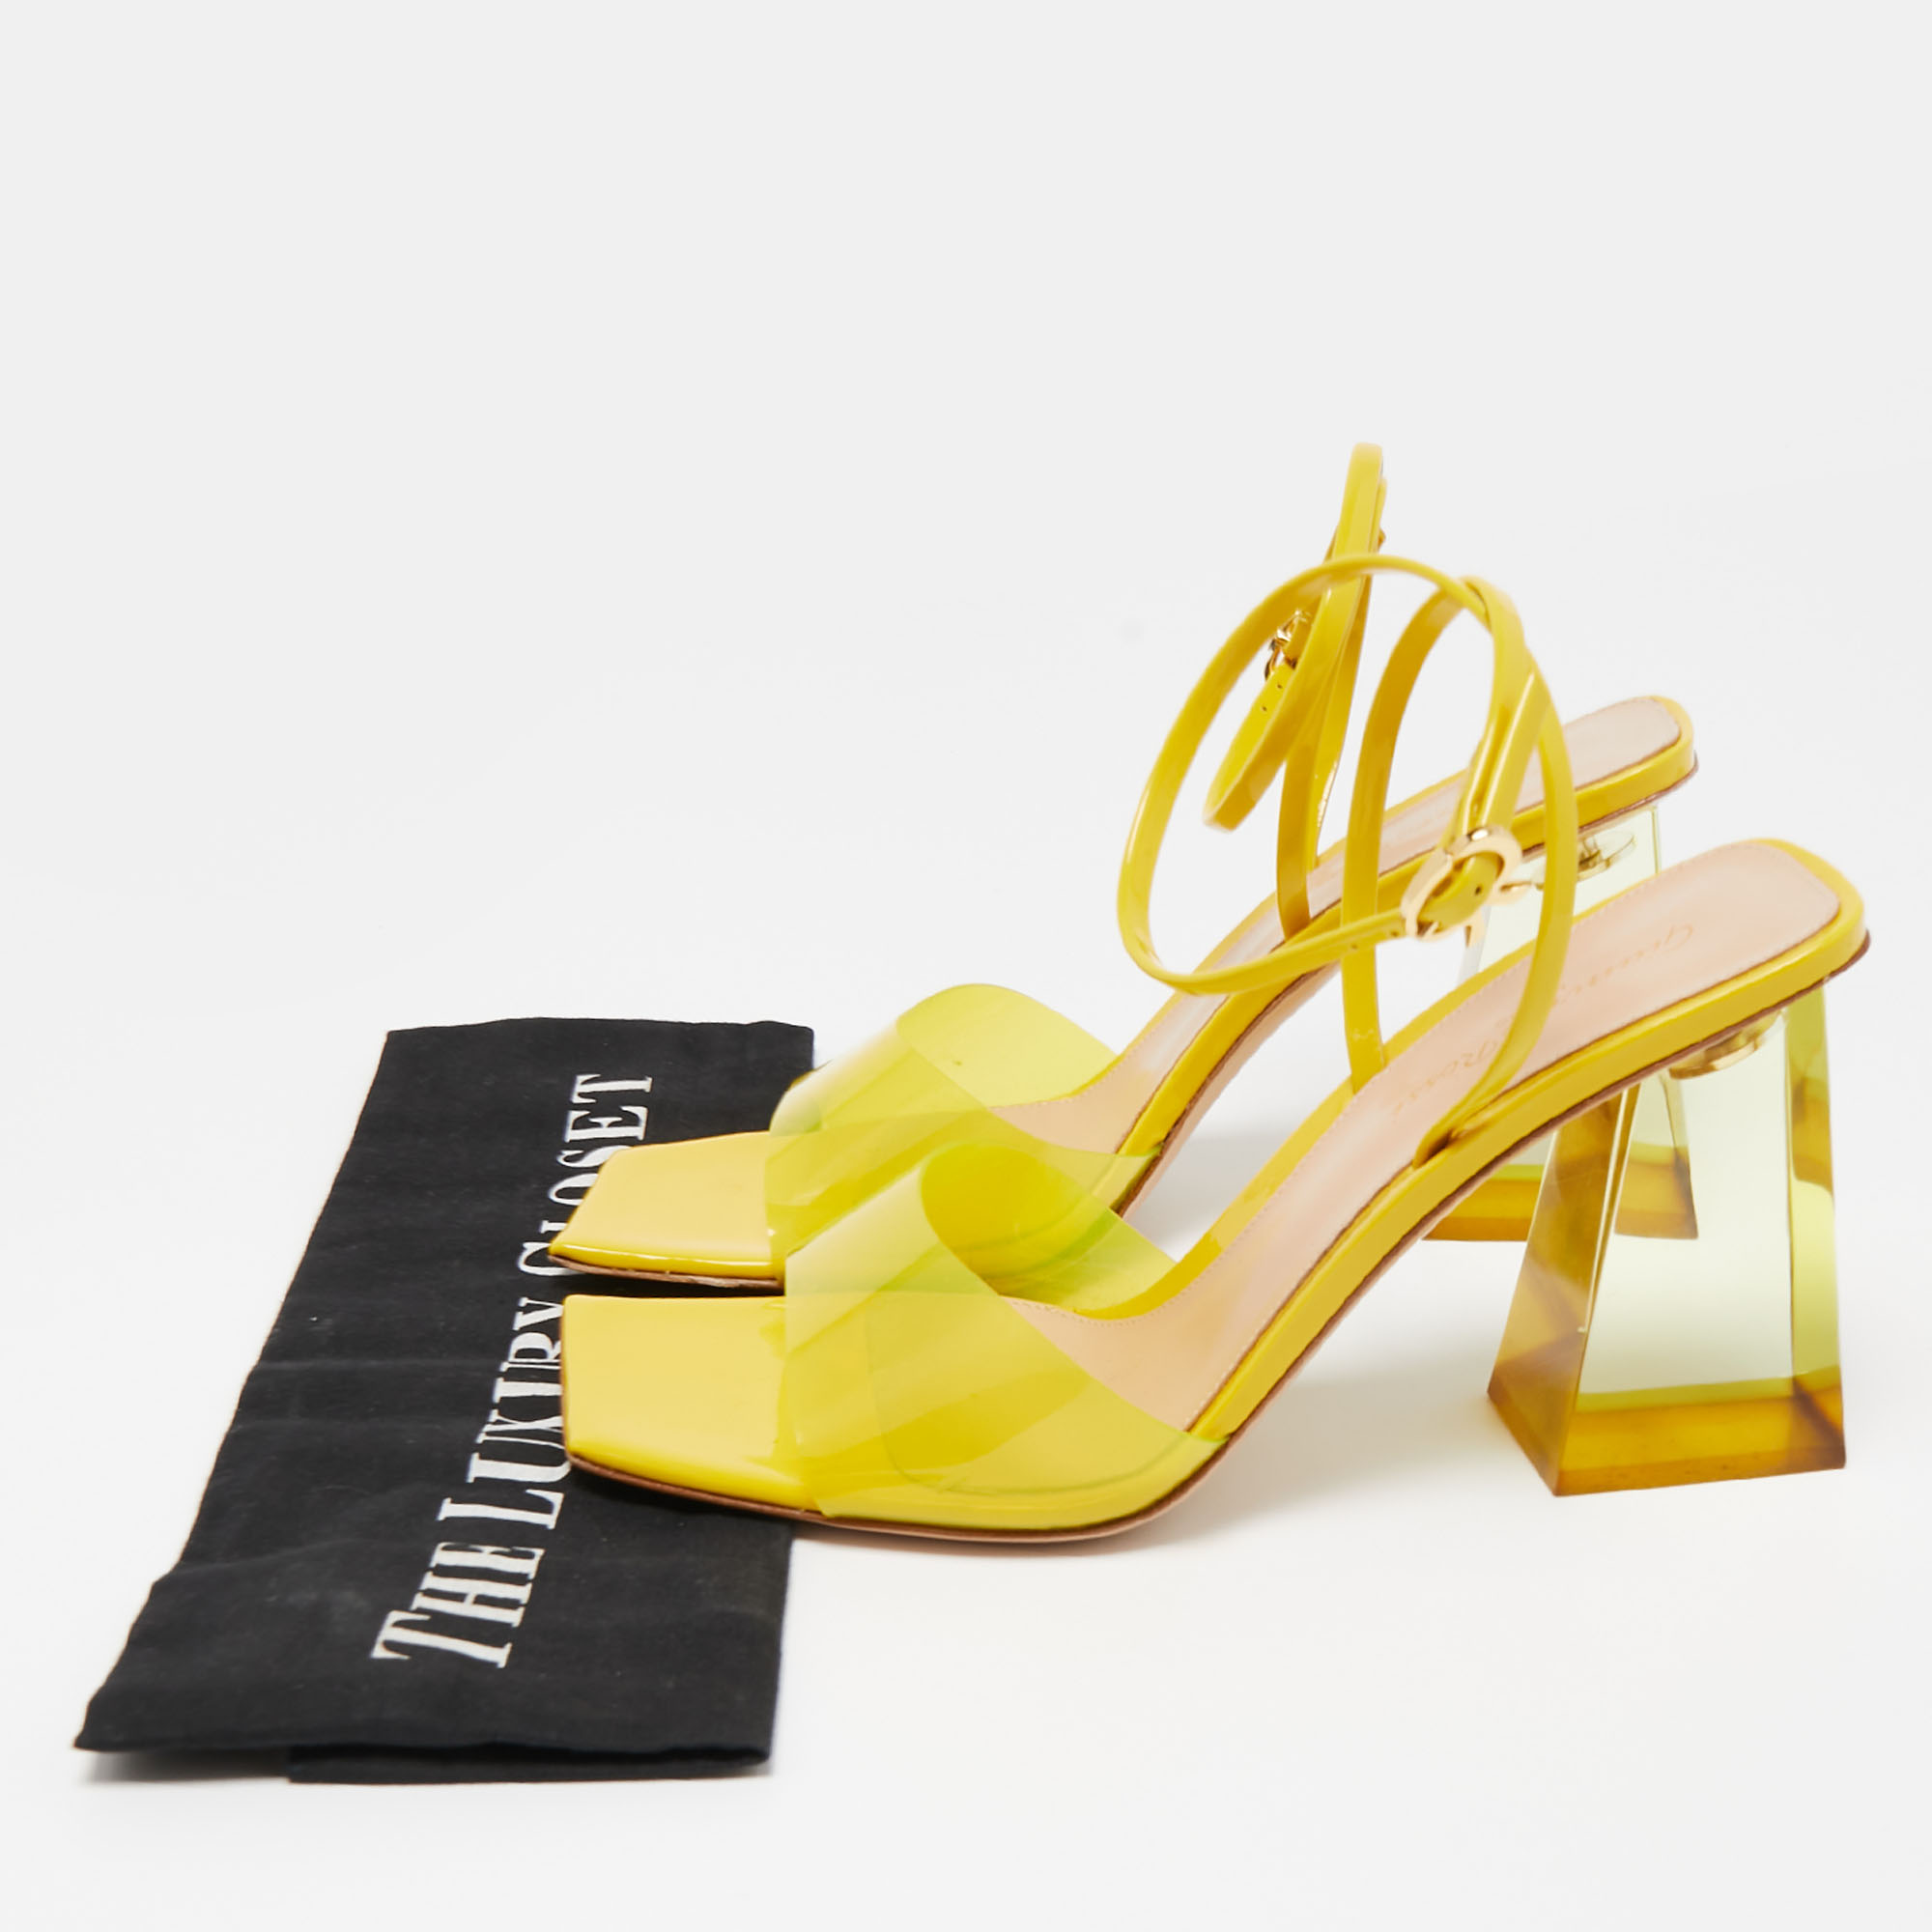 Gianvito Rossi Yellow Patent And PVC Ankle Wrap Sandals Size 38